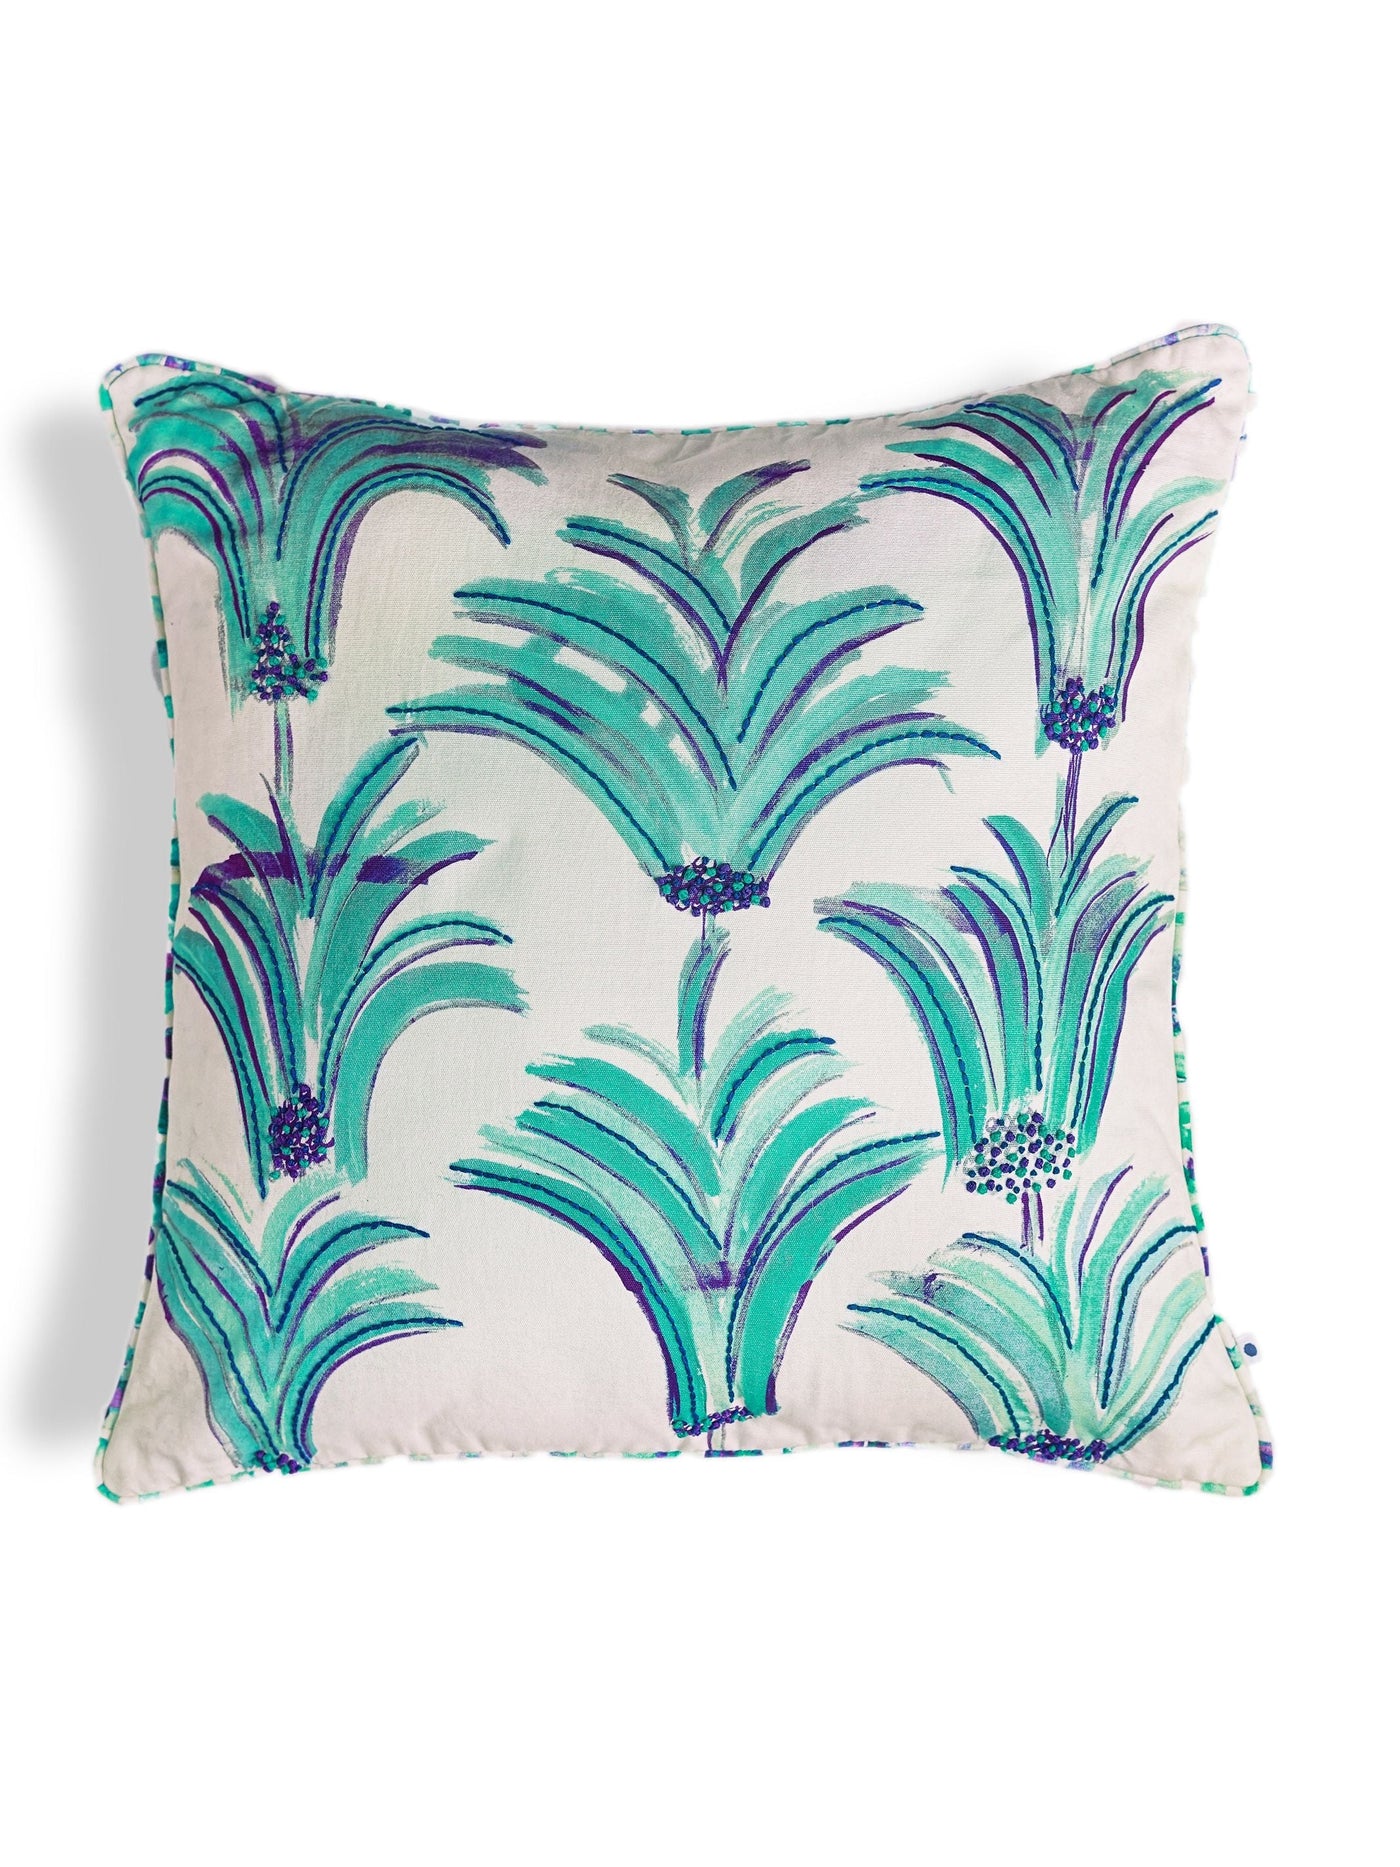 Sprig Cushion Cover Turquoise